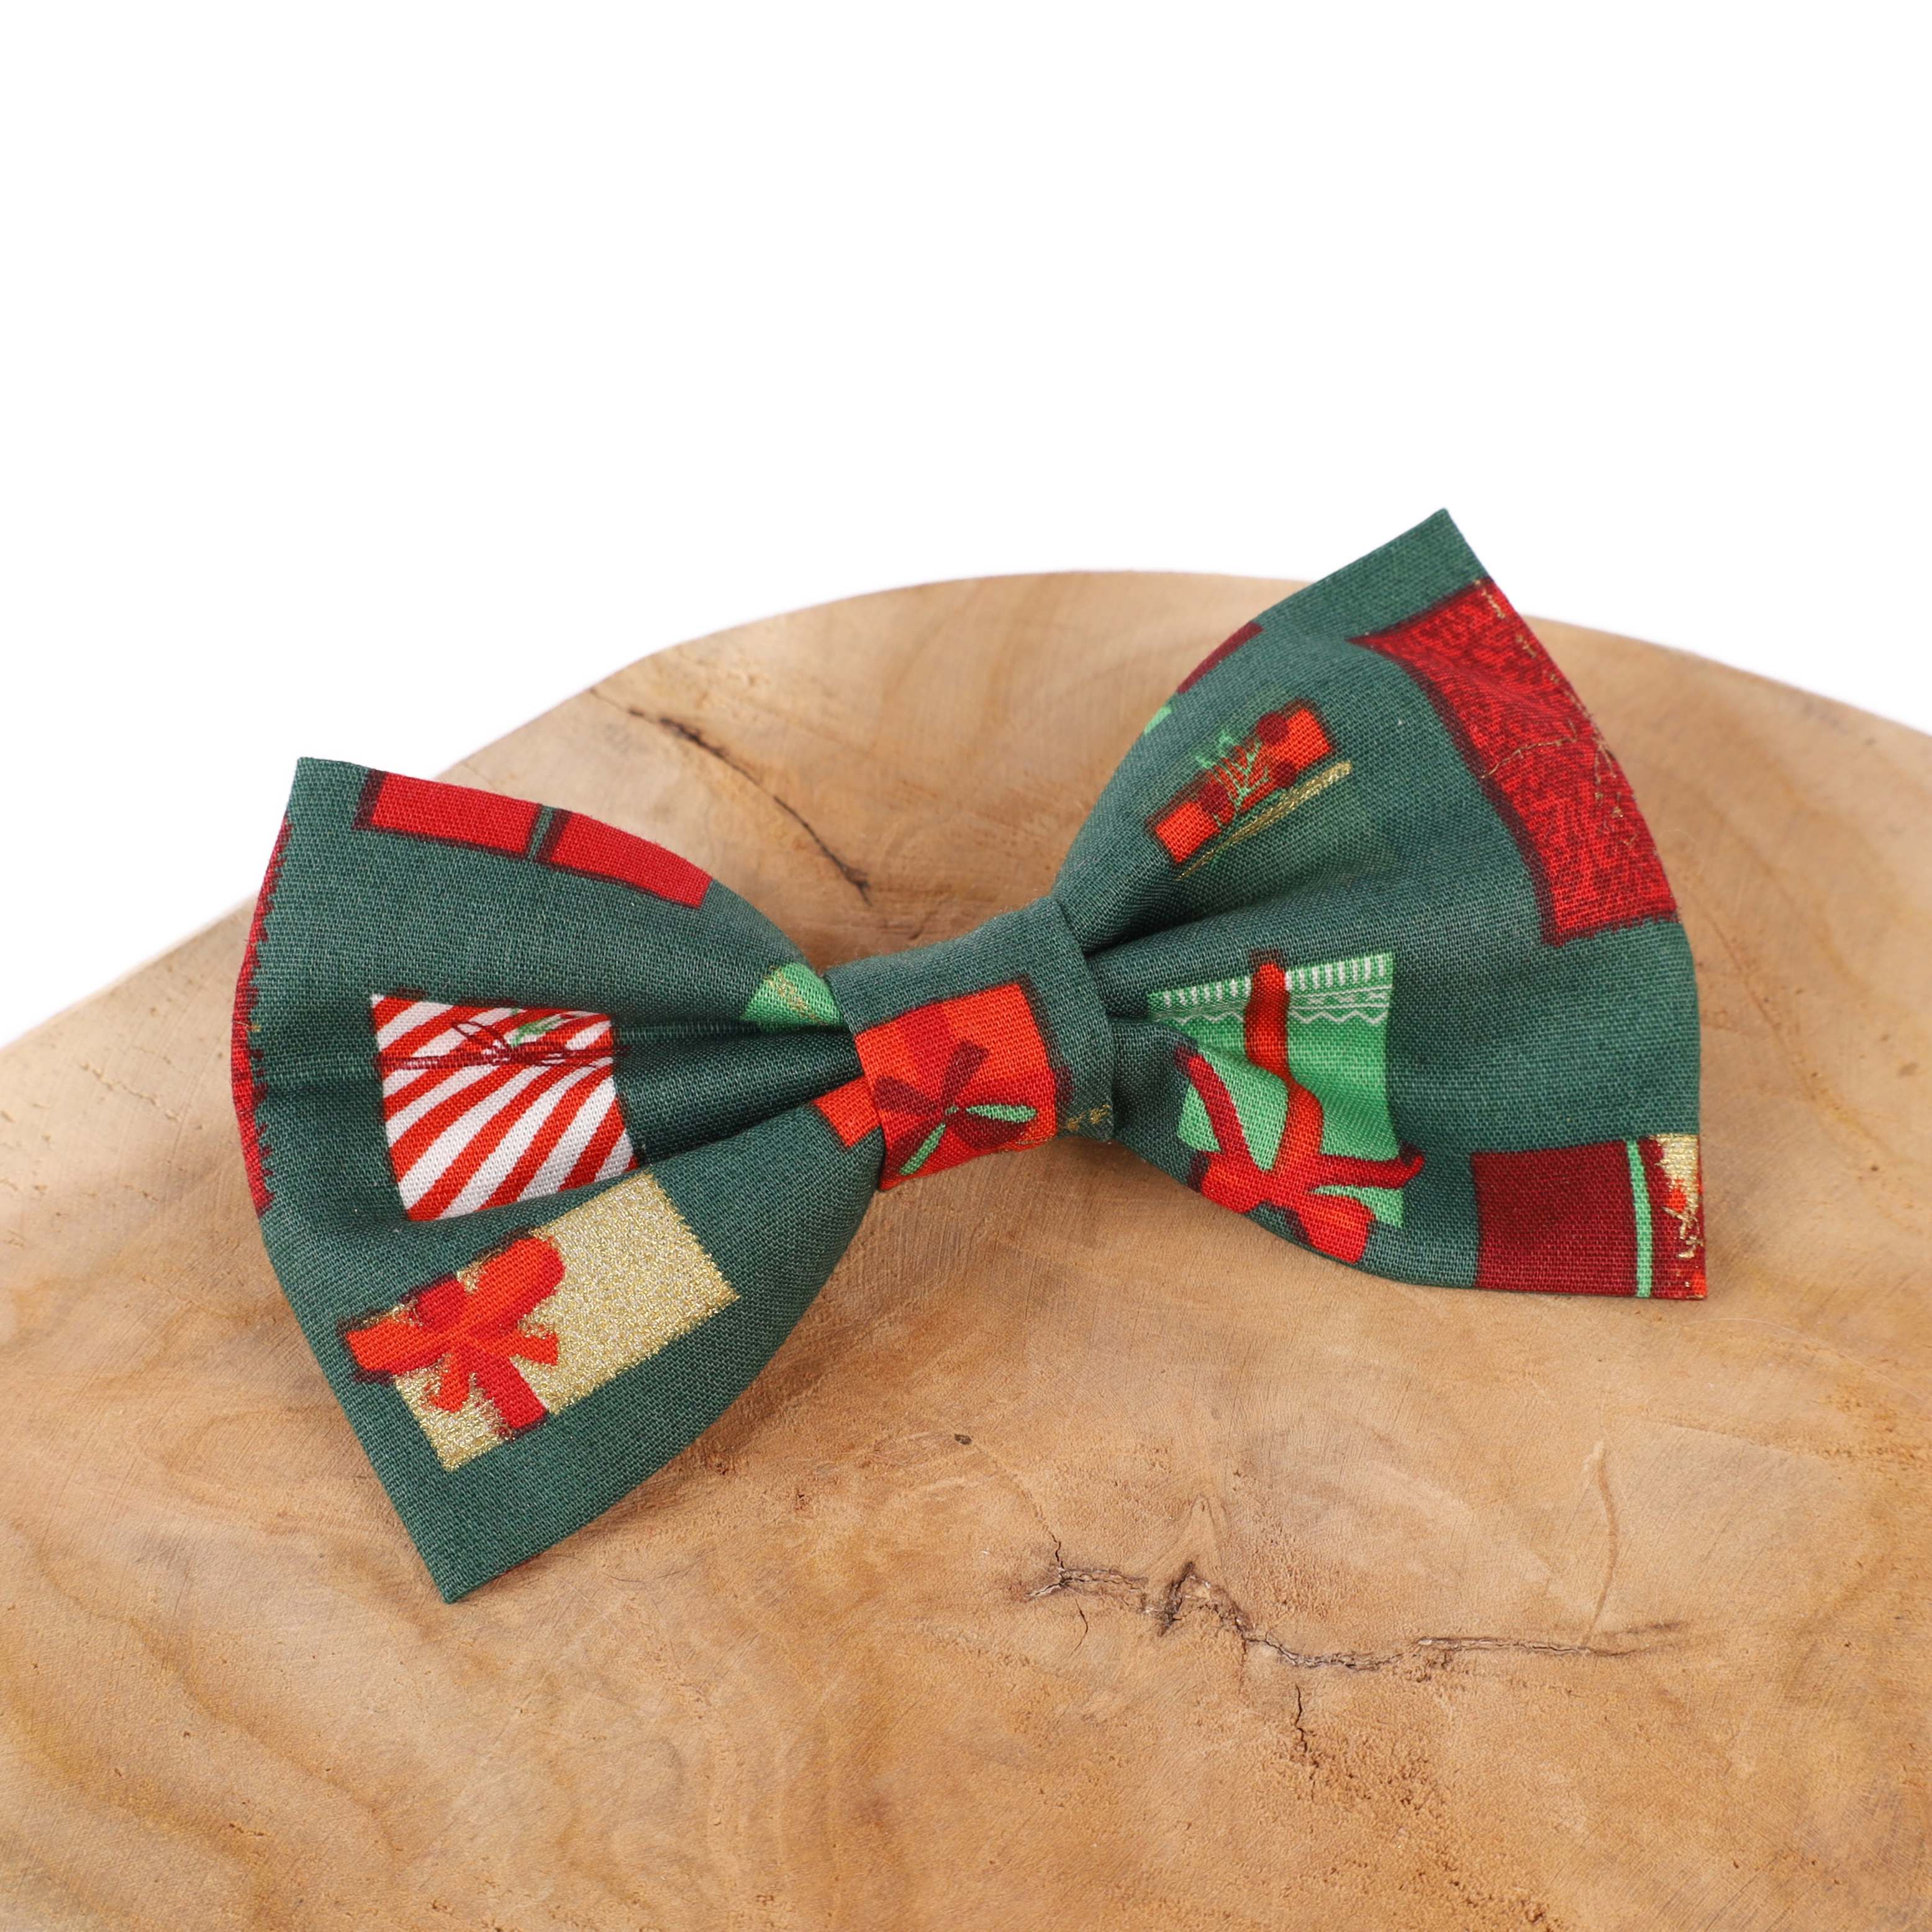 Bow tie – A gift for you